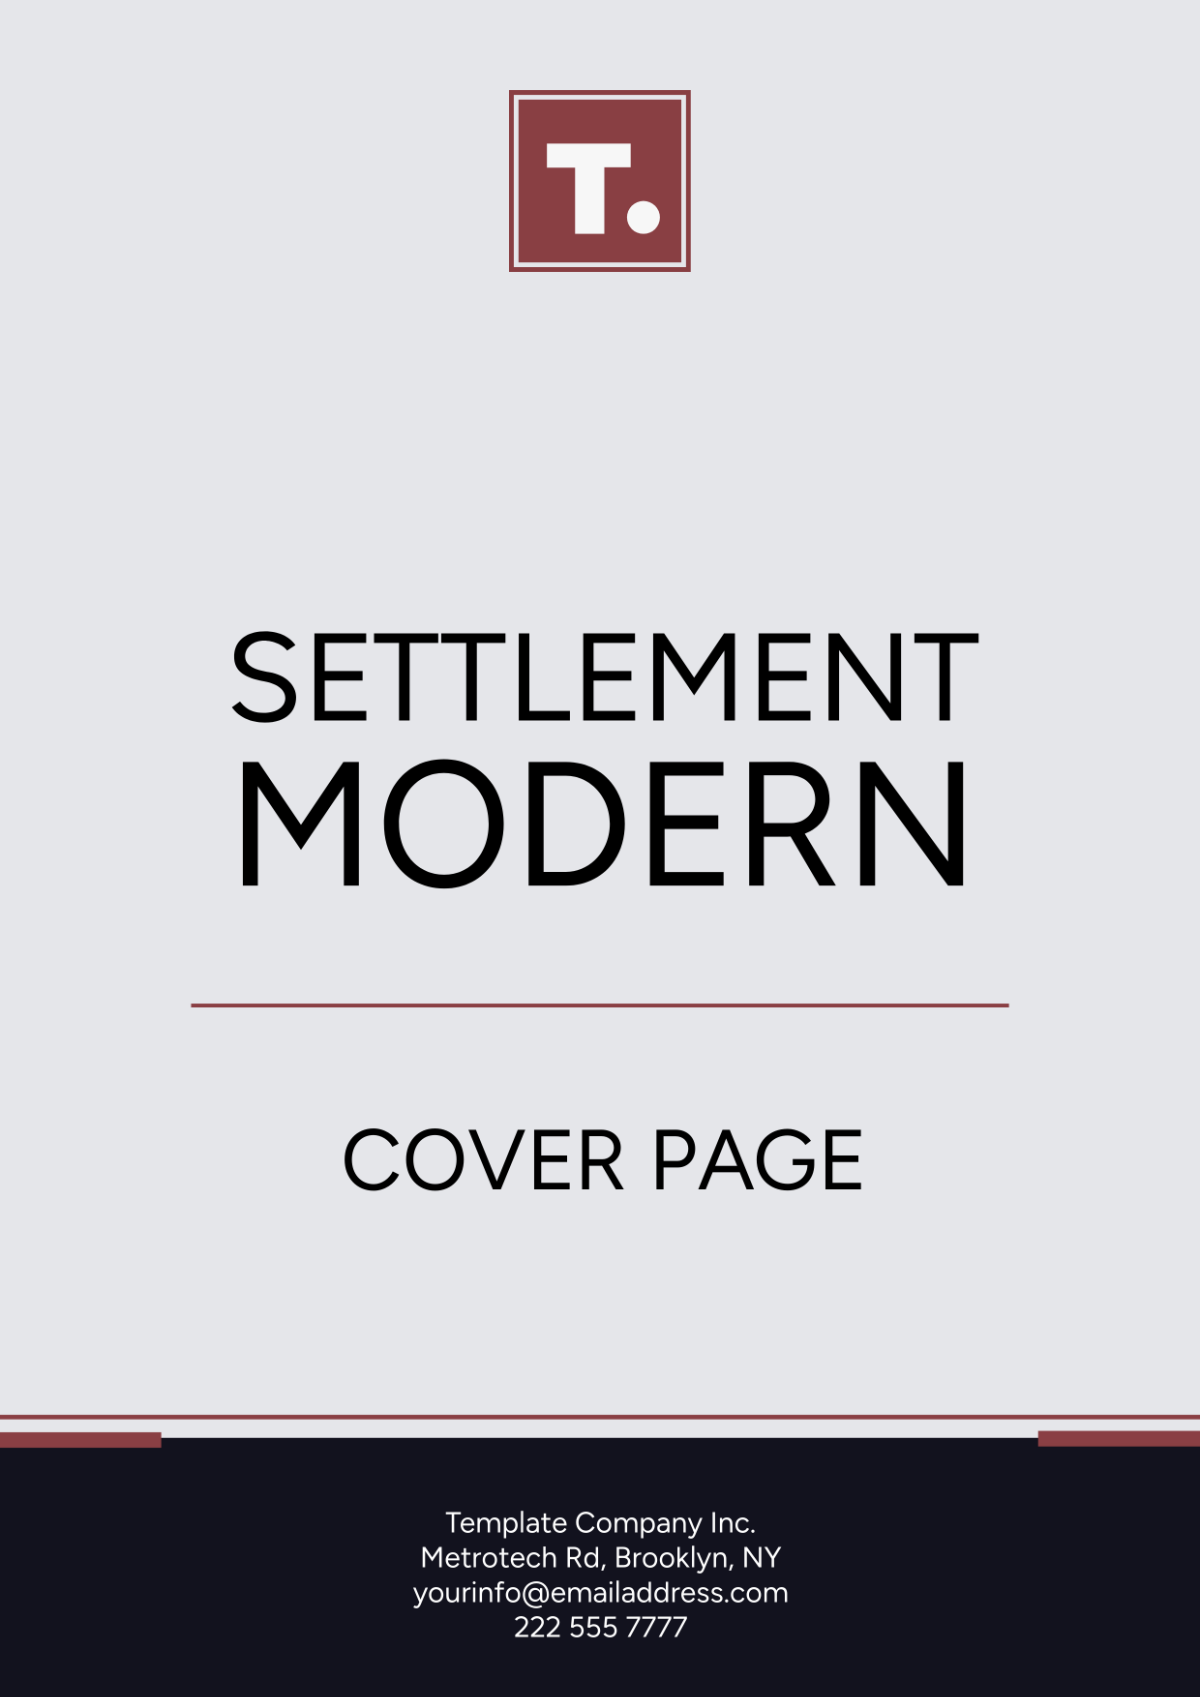 Settlement Modern Cover Page